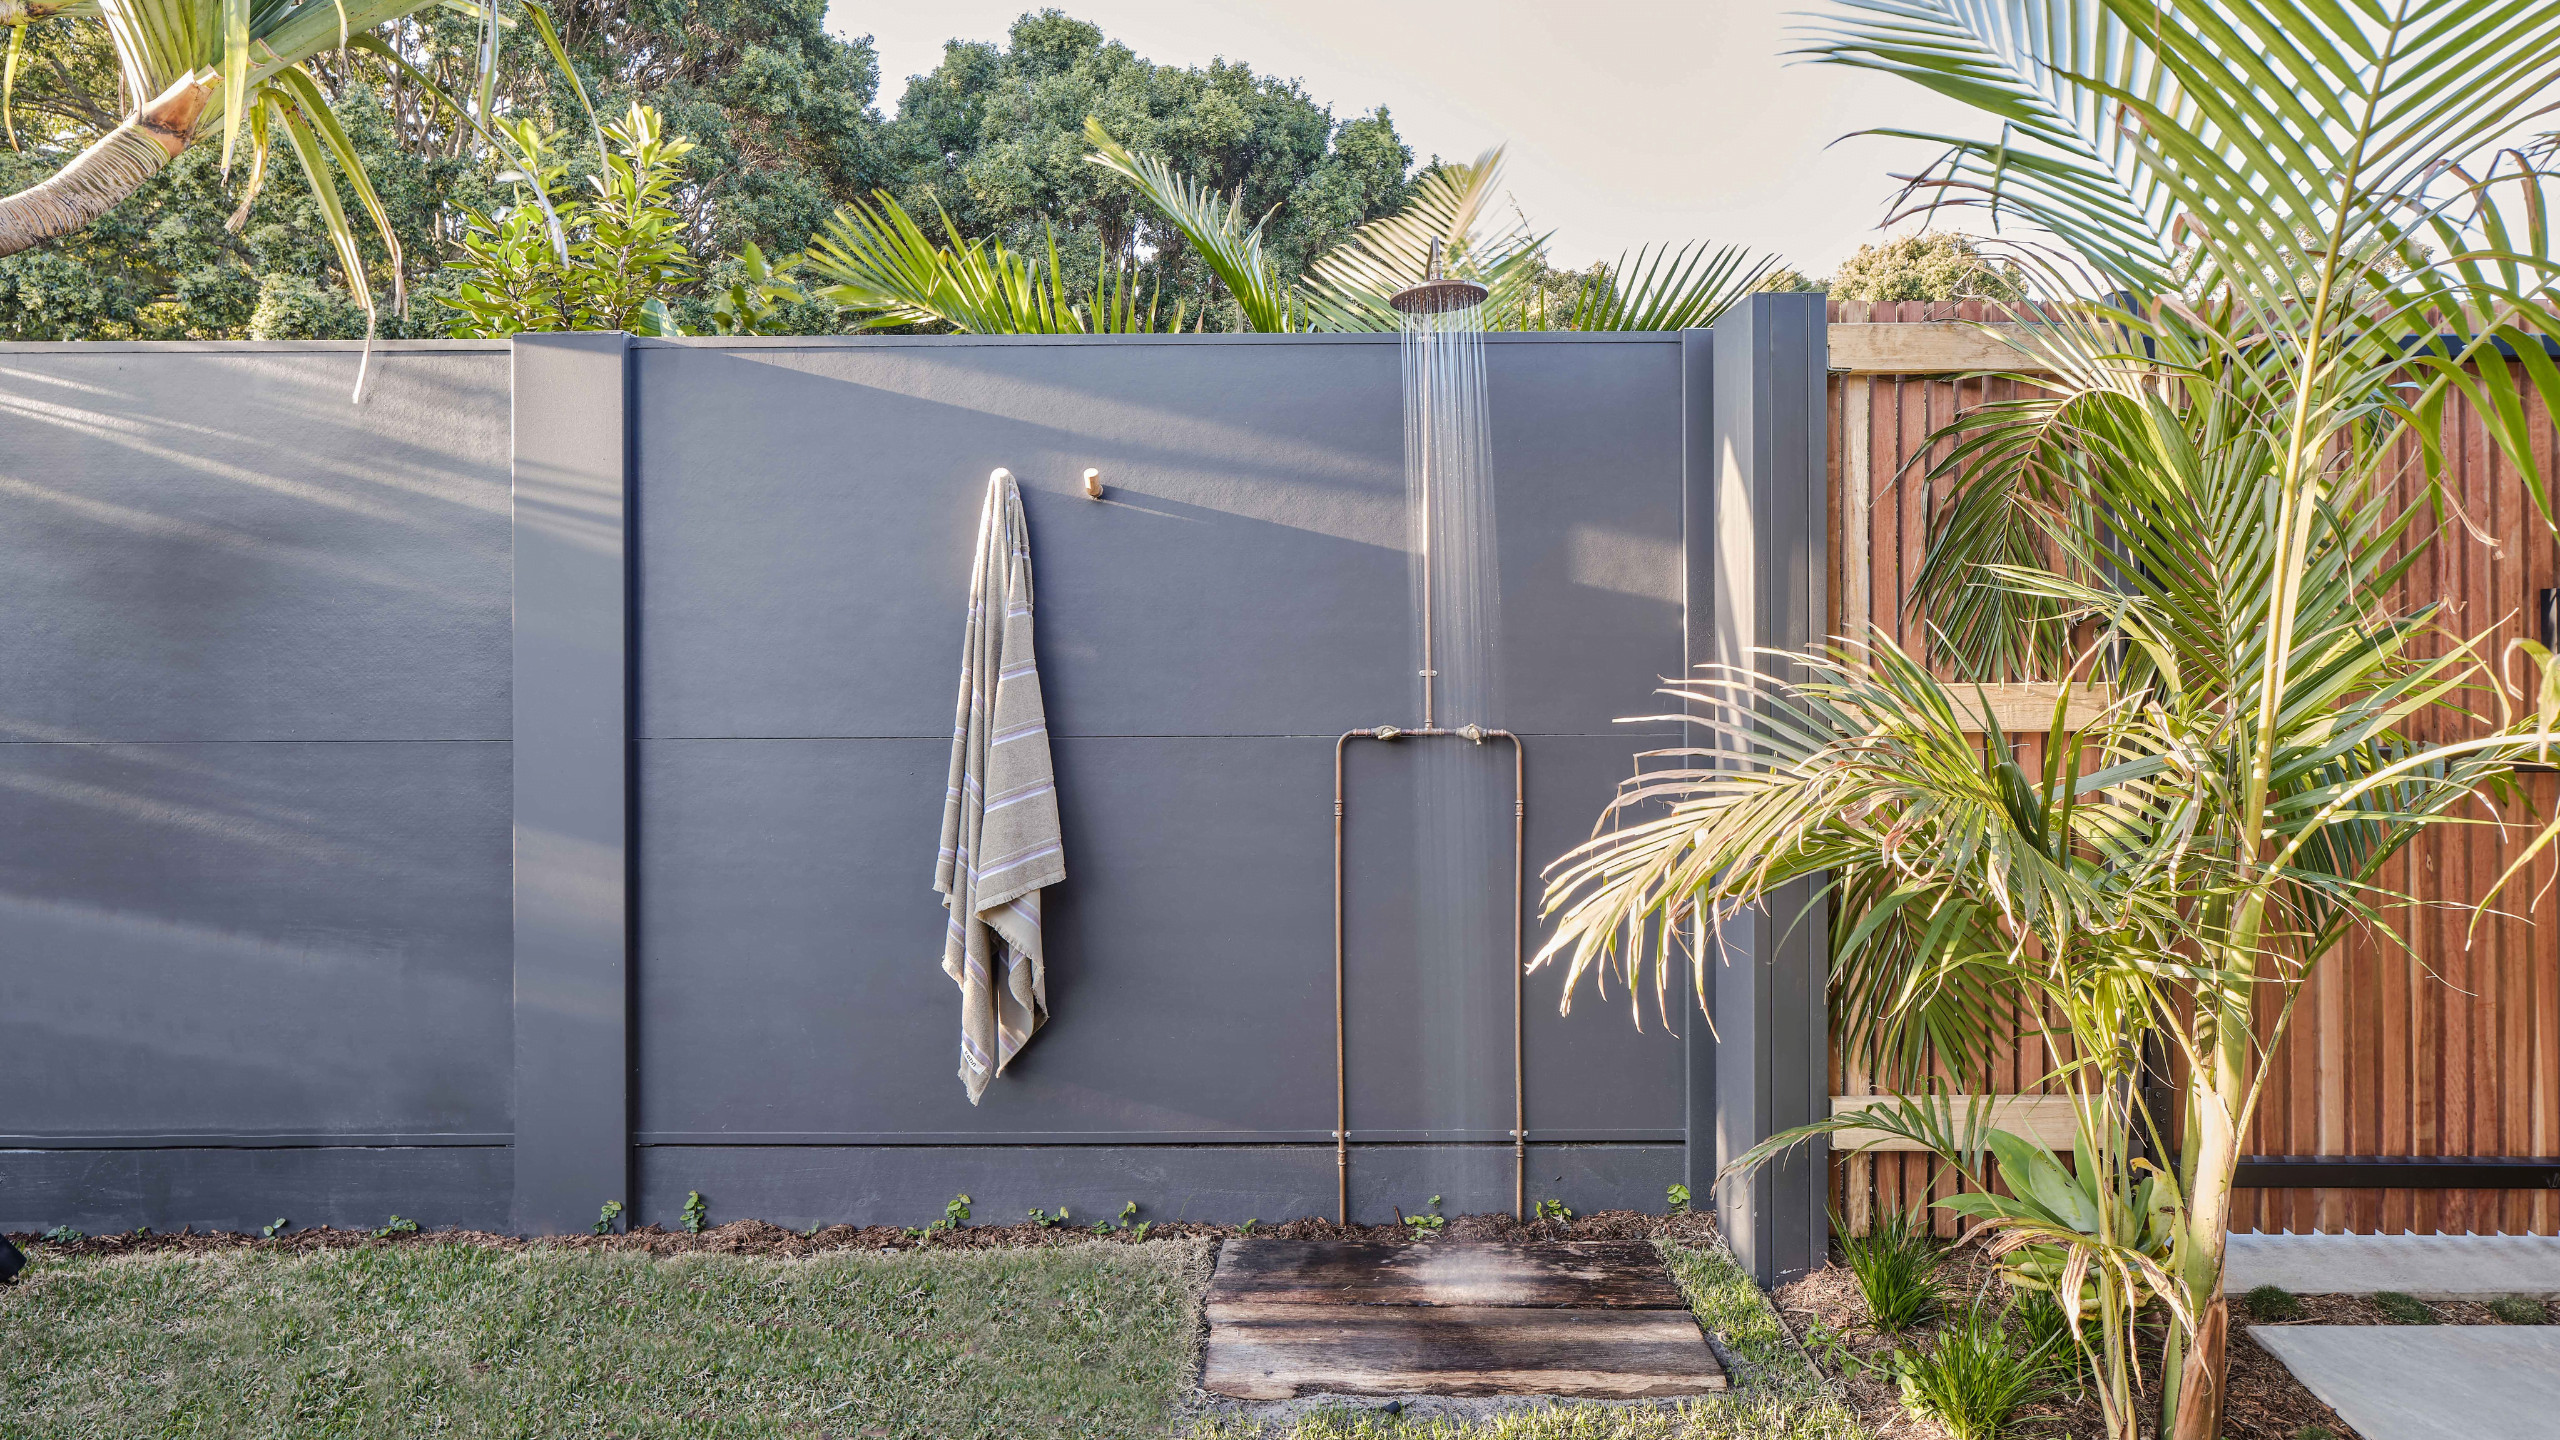 VogueWall with outdoor shower - The Designory